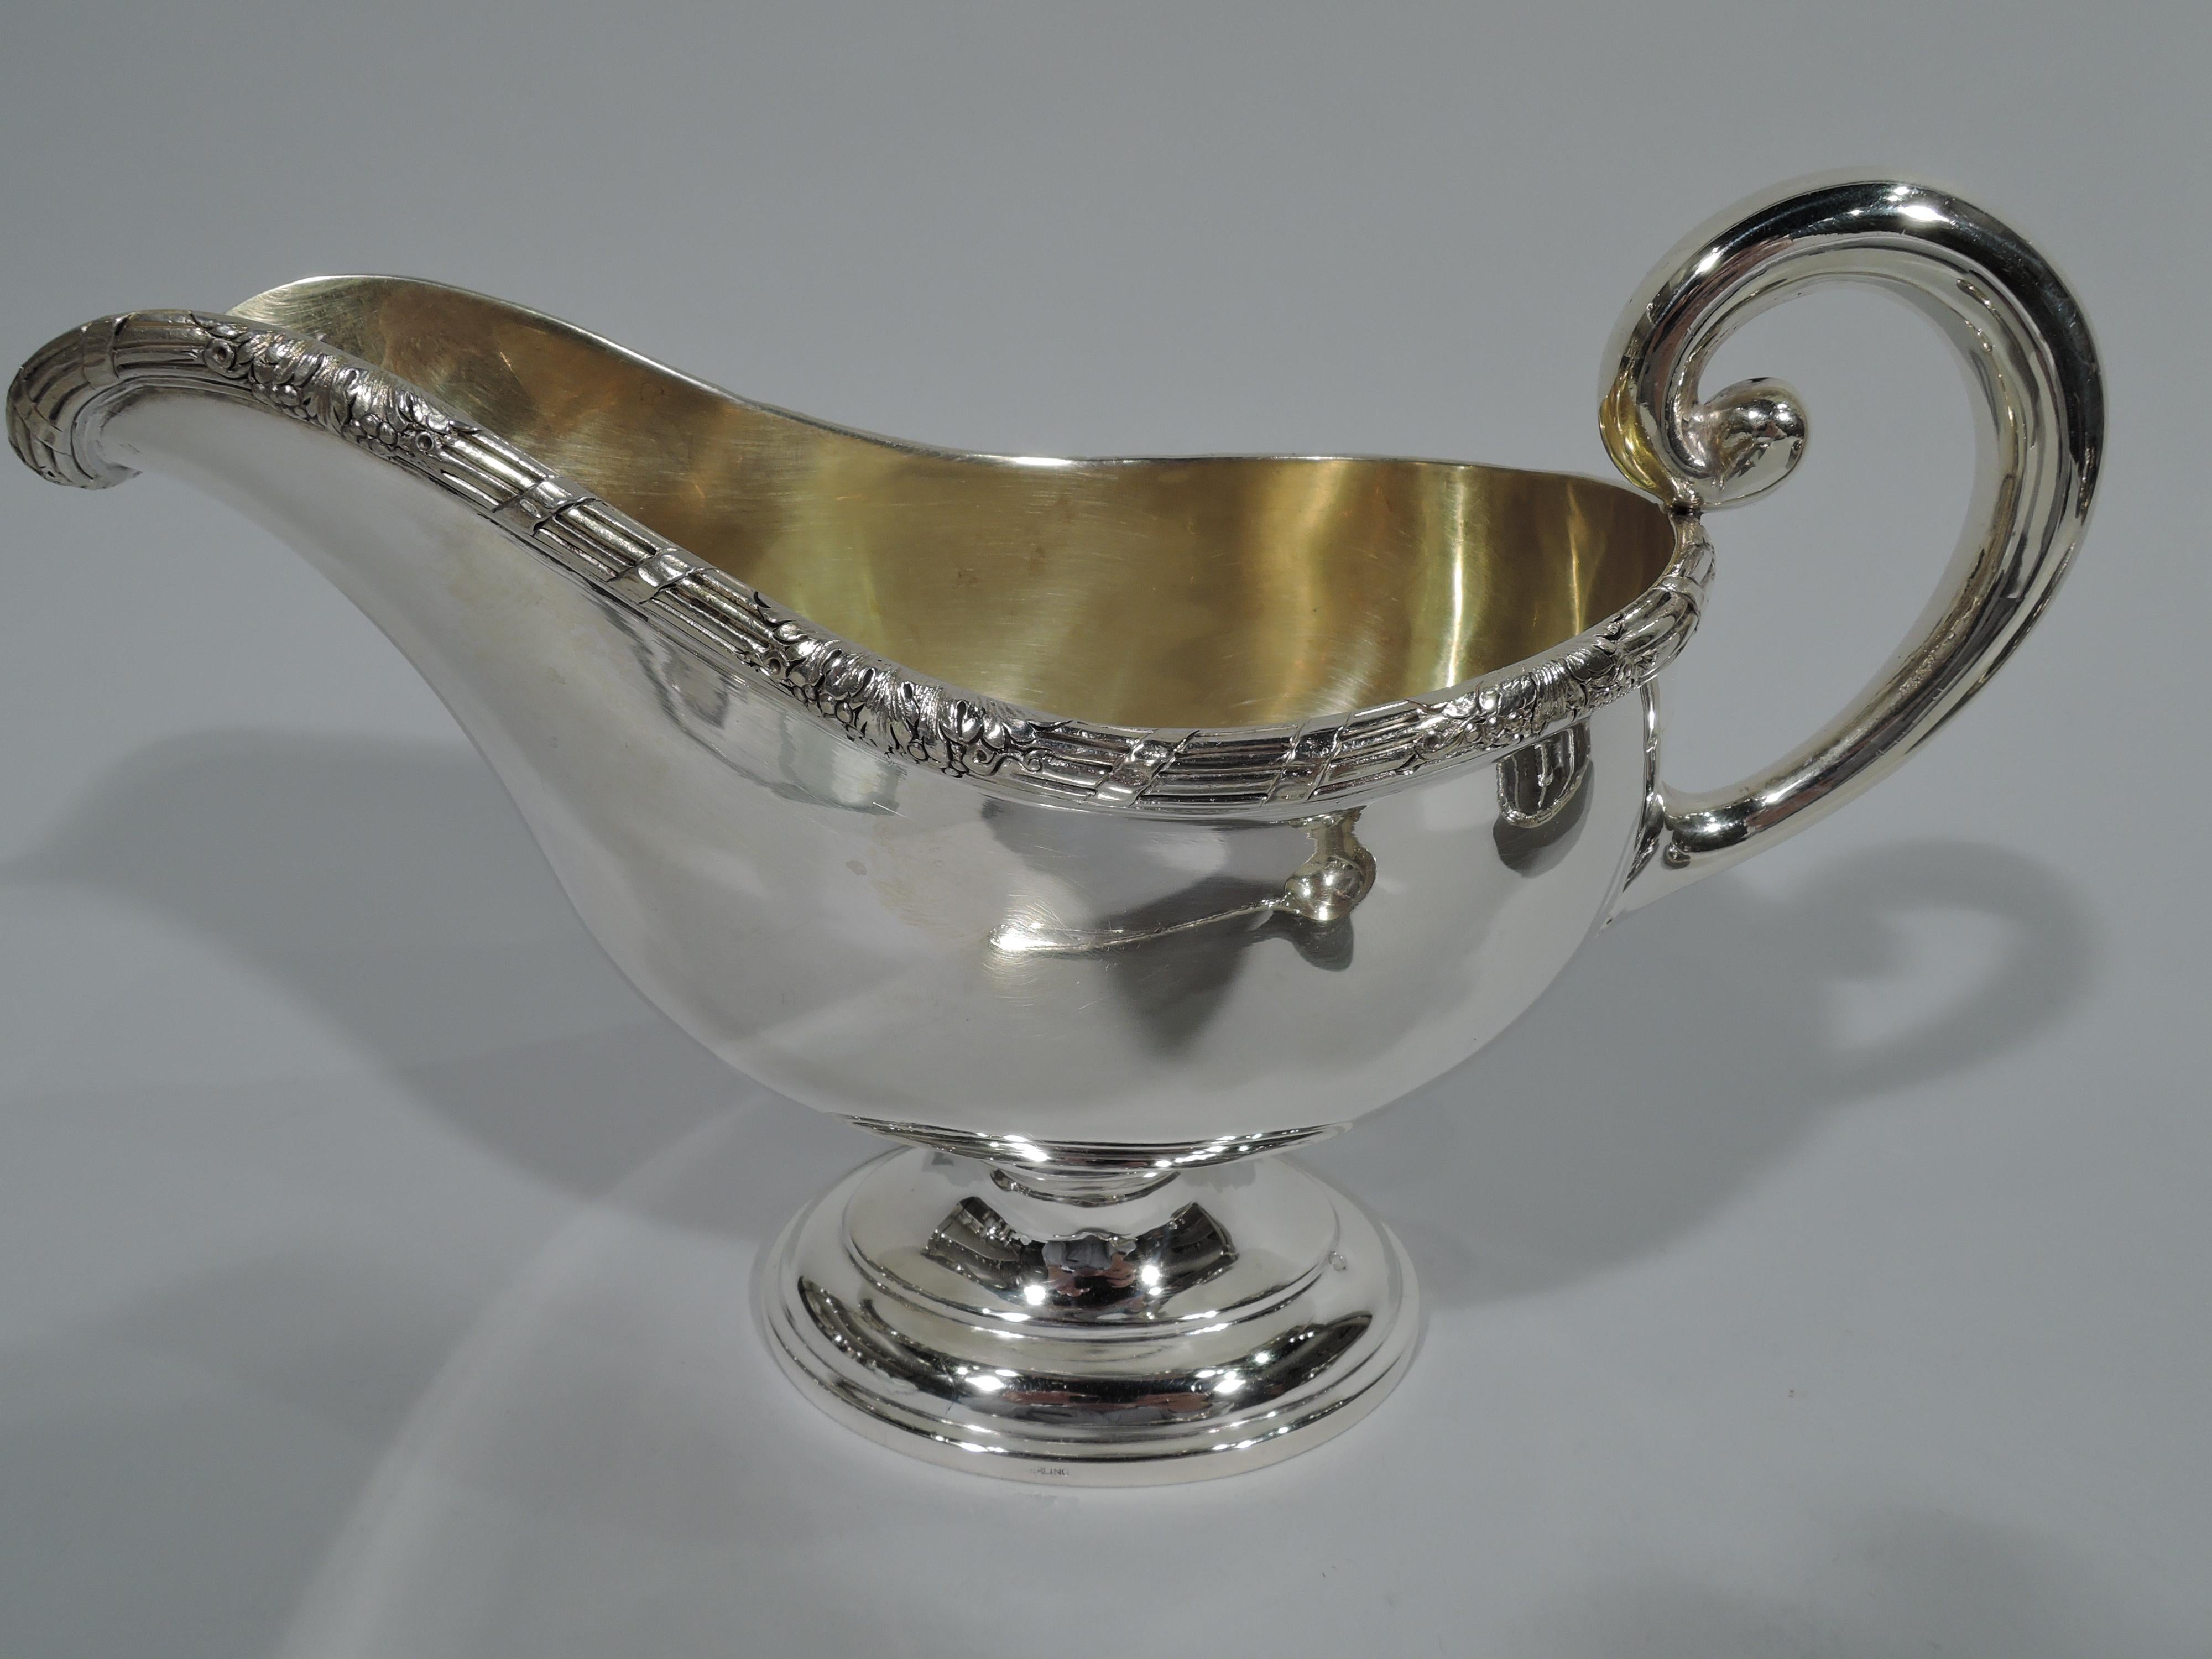 Neoclassical Revival Antique Austrian Neoclassical Silver Gravy Boat on Stand with Ladle